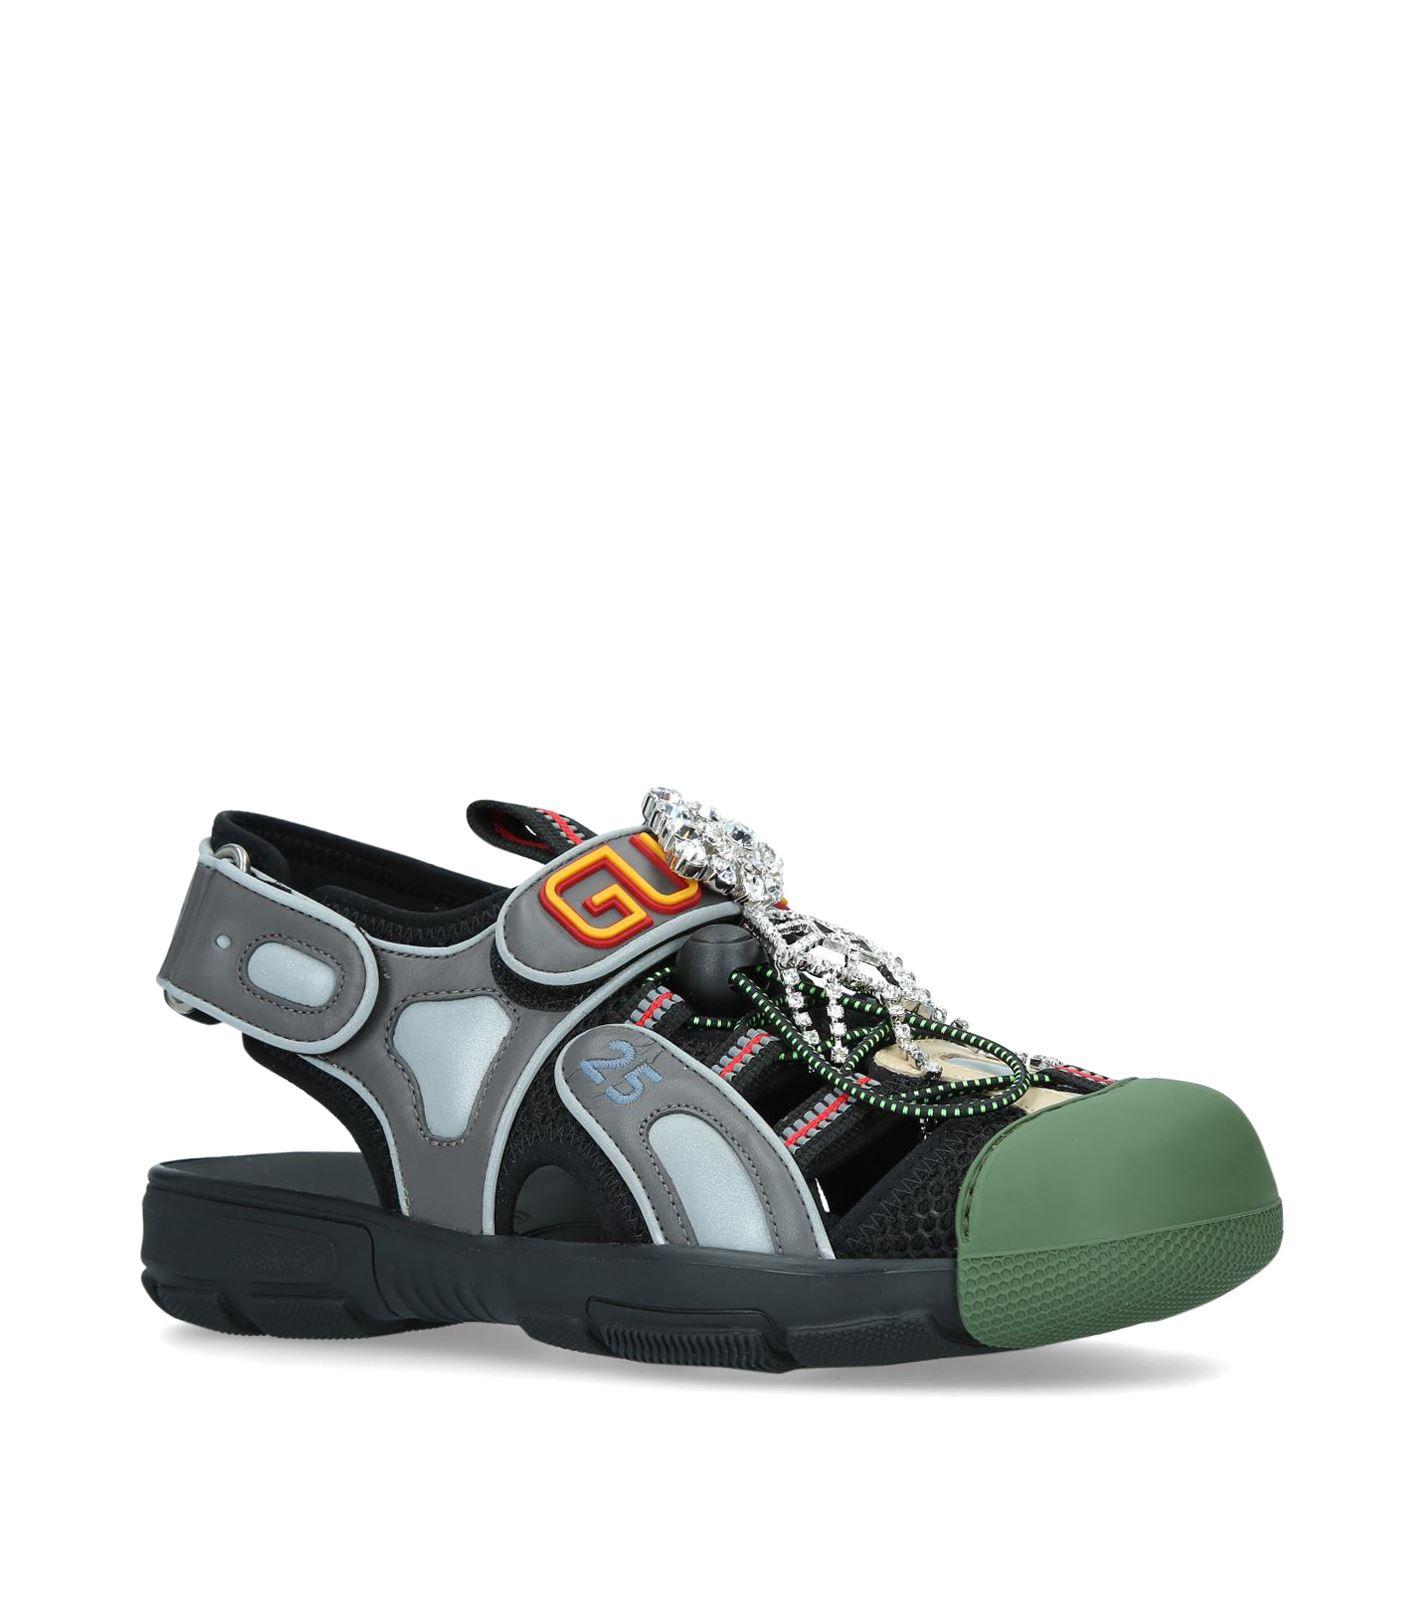 Gucci Tinsel Hiking Sandals in Green - Lyst